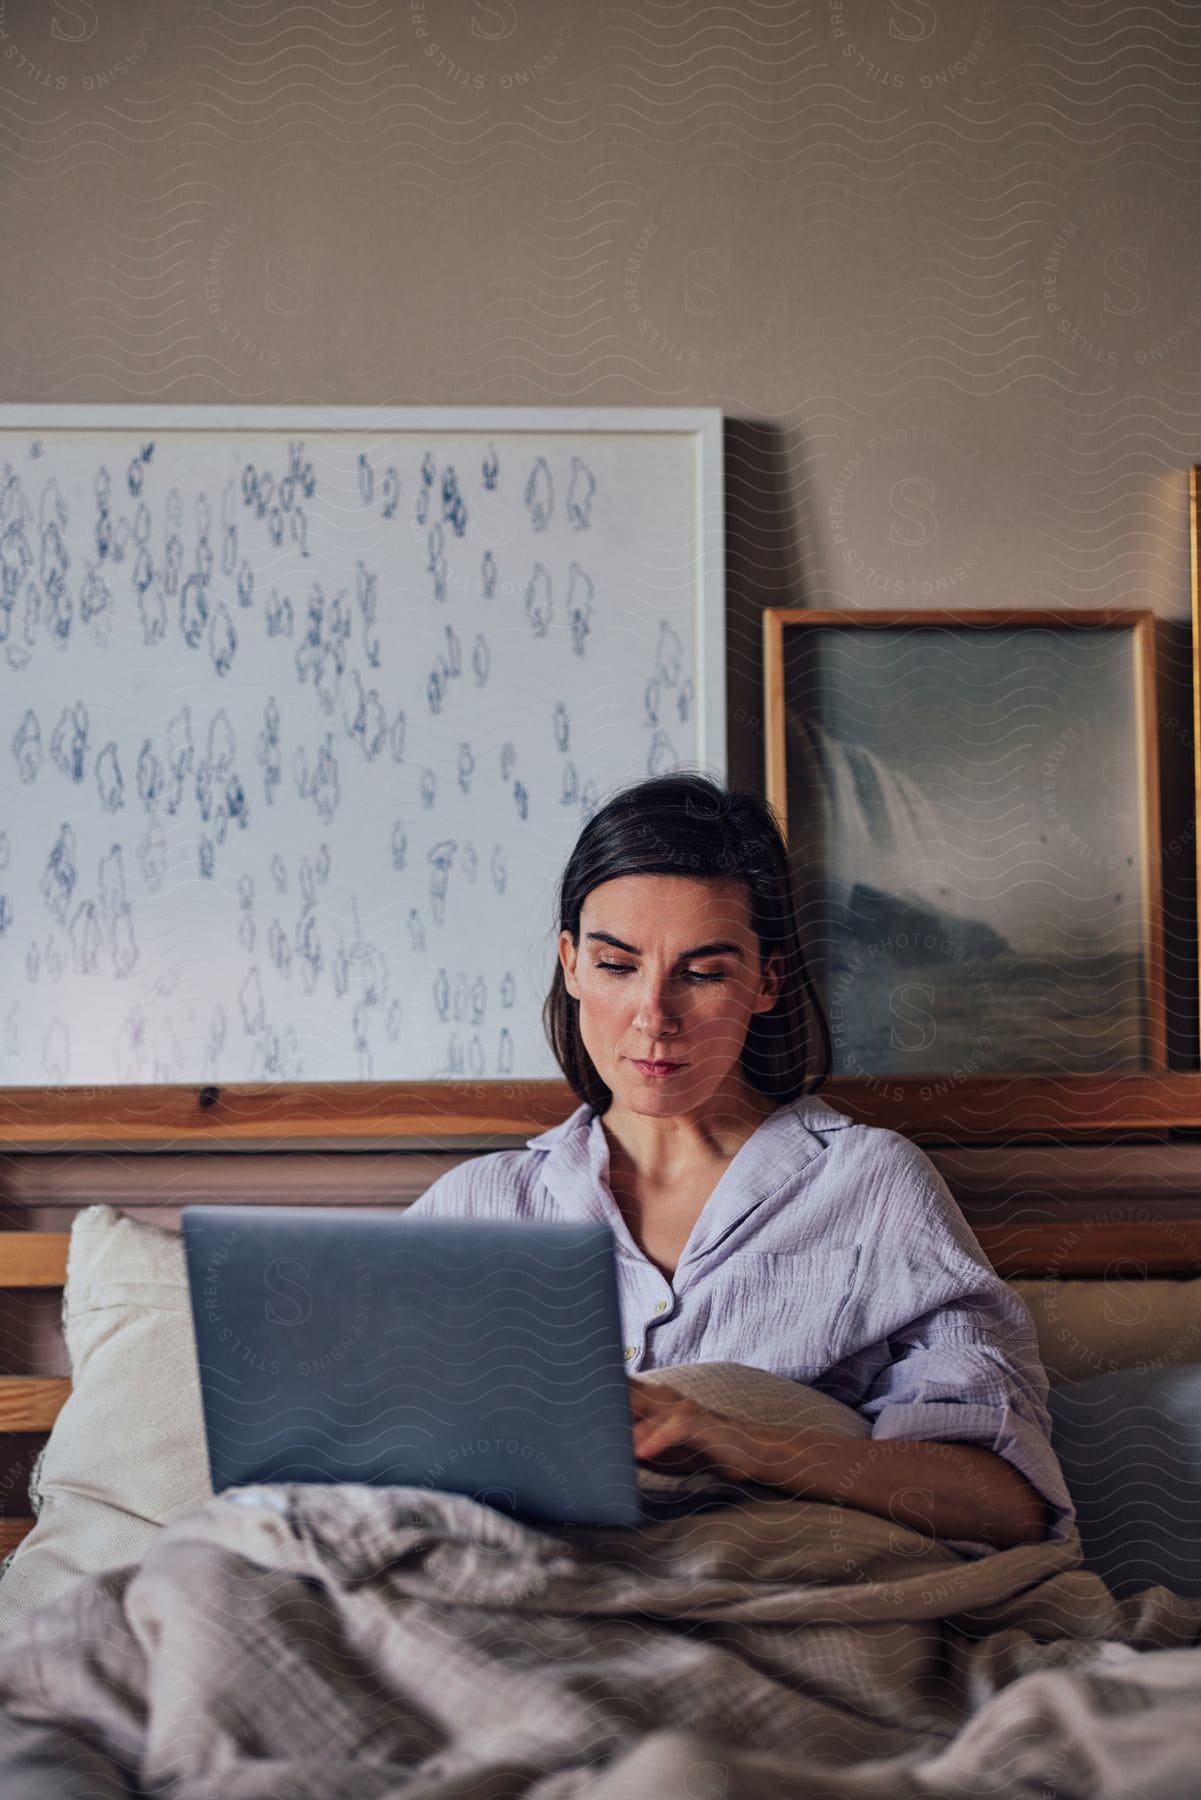 A woman focused on a laptop screen, sitting up in bed with bedding pulled up to her waist.